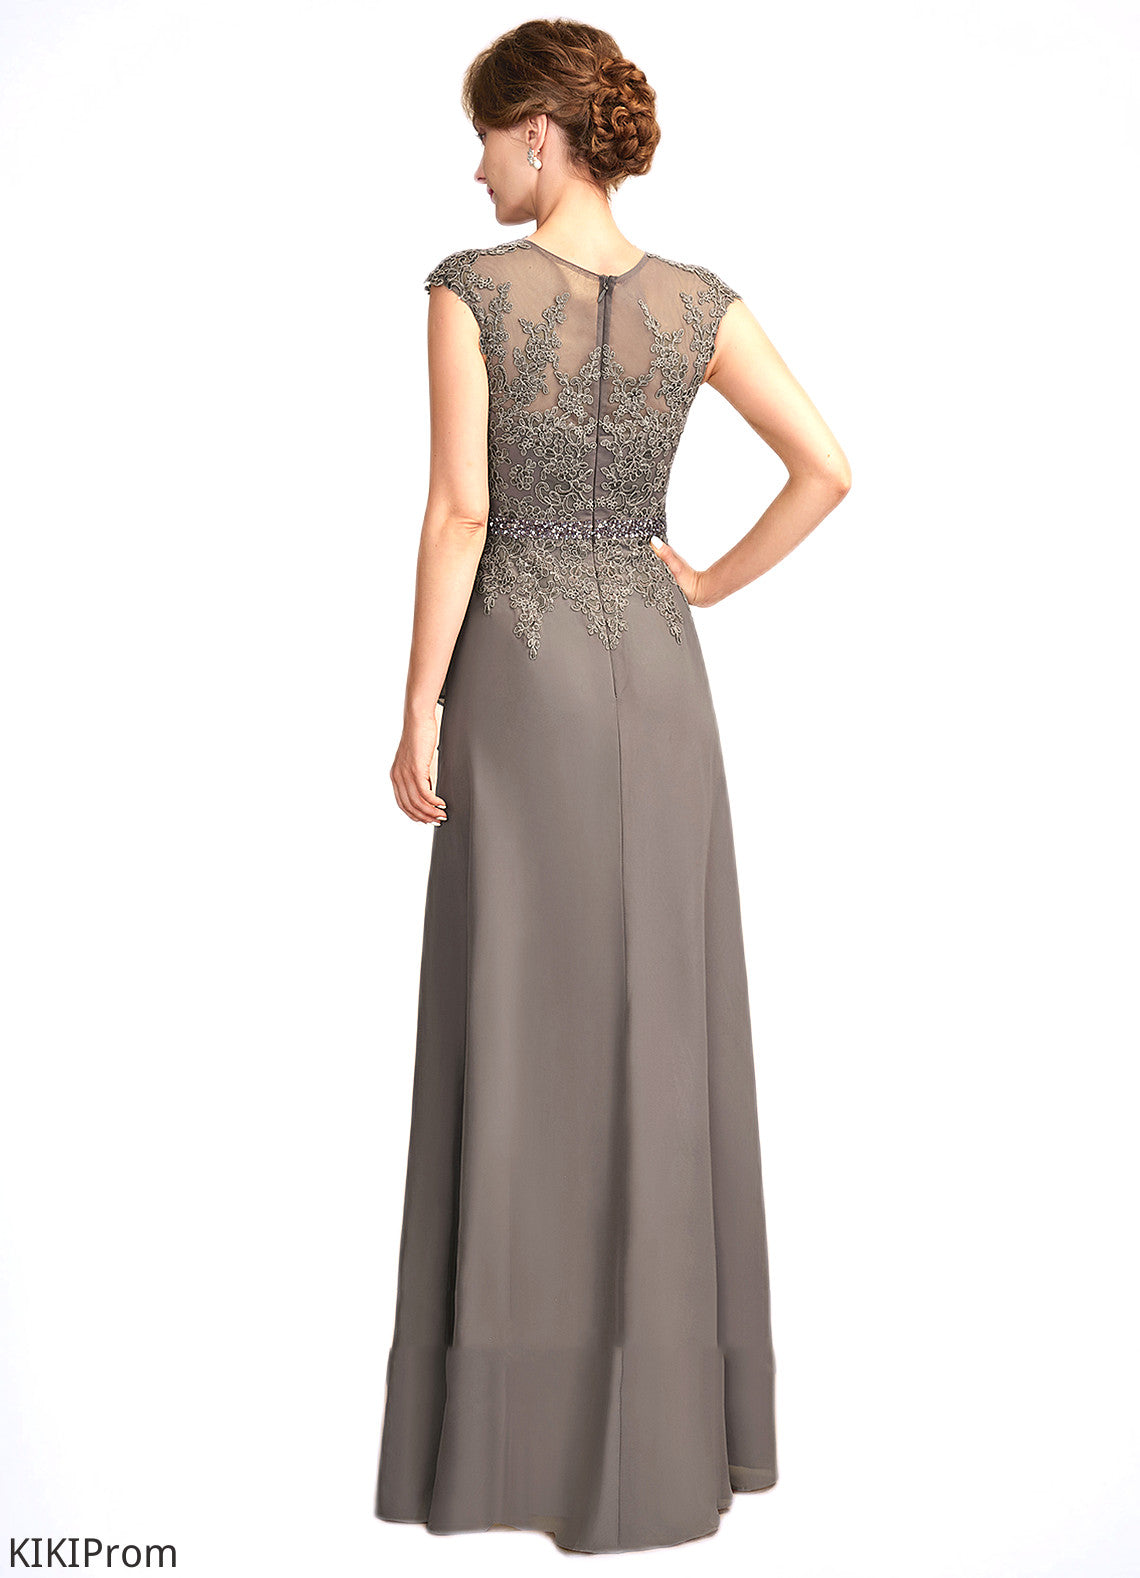 Bridget A-Line V-neck Floor-Length Chiffon Lace Mother of the Bride Dress With Beading Sequins Cascading Ruffles DZ126P0015030